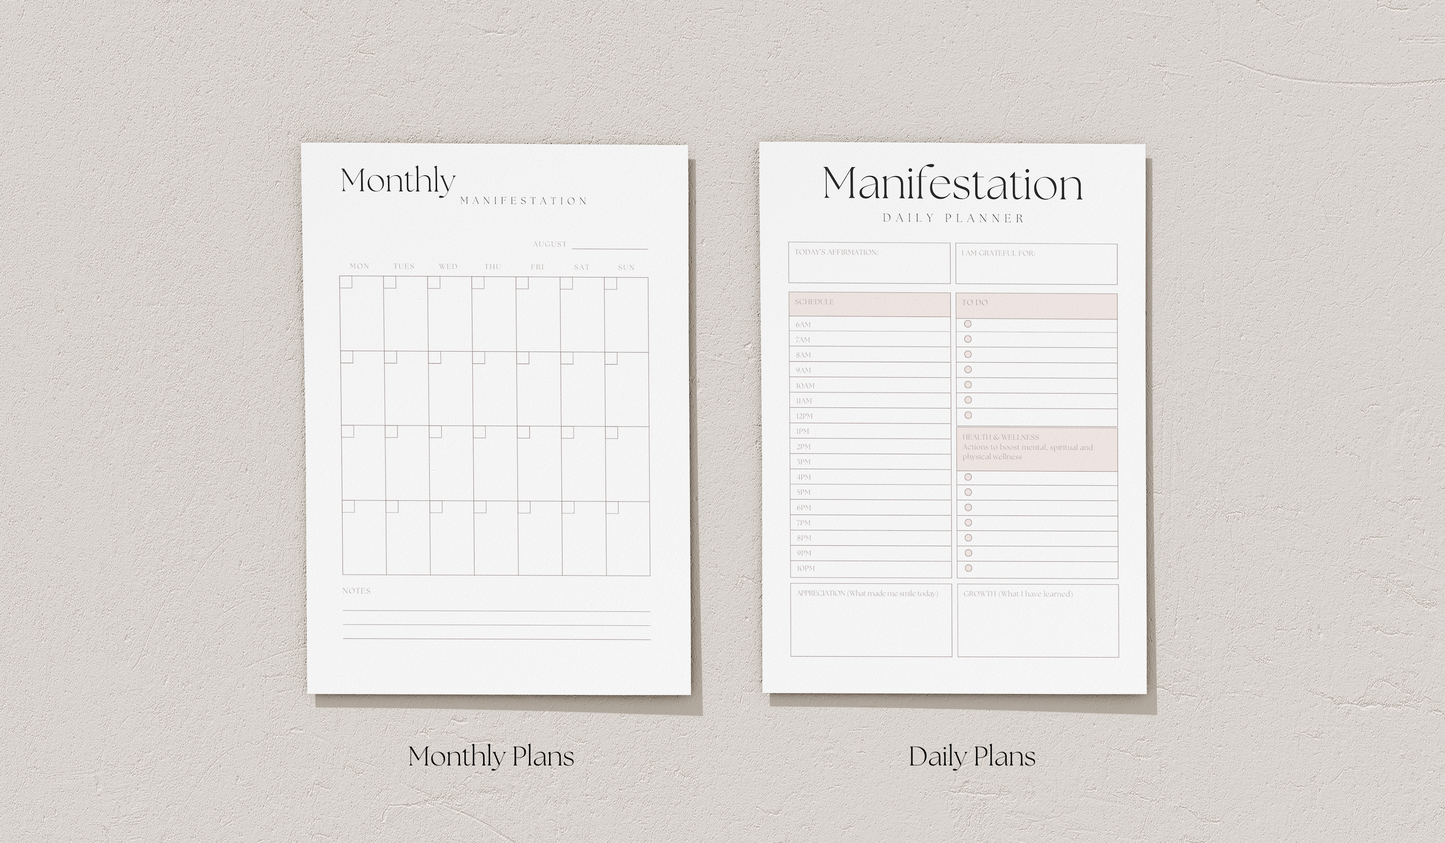 How To Manifest Your Dreams Digital Planner